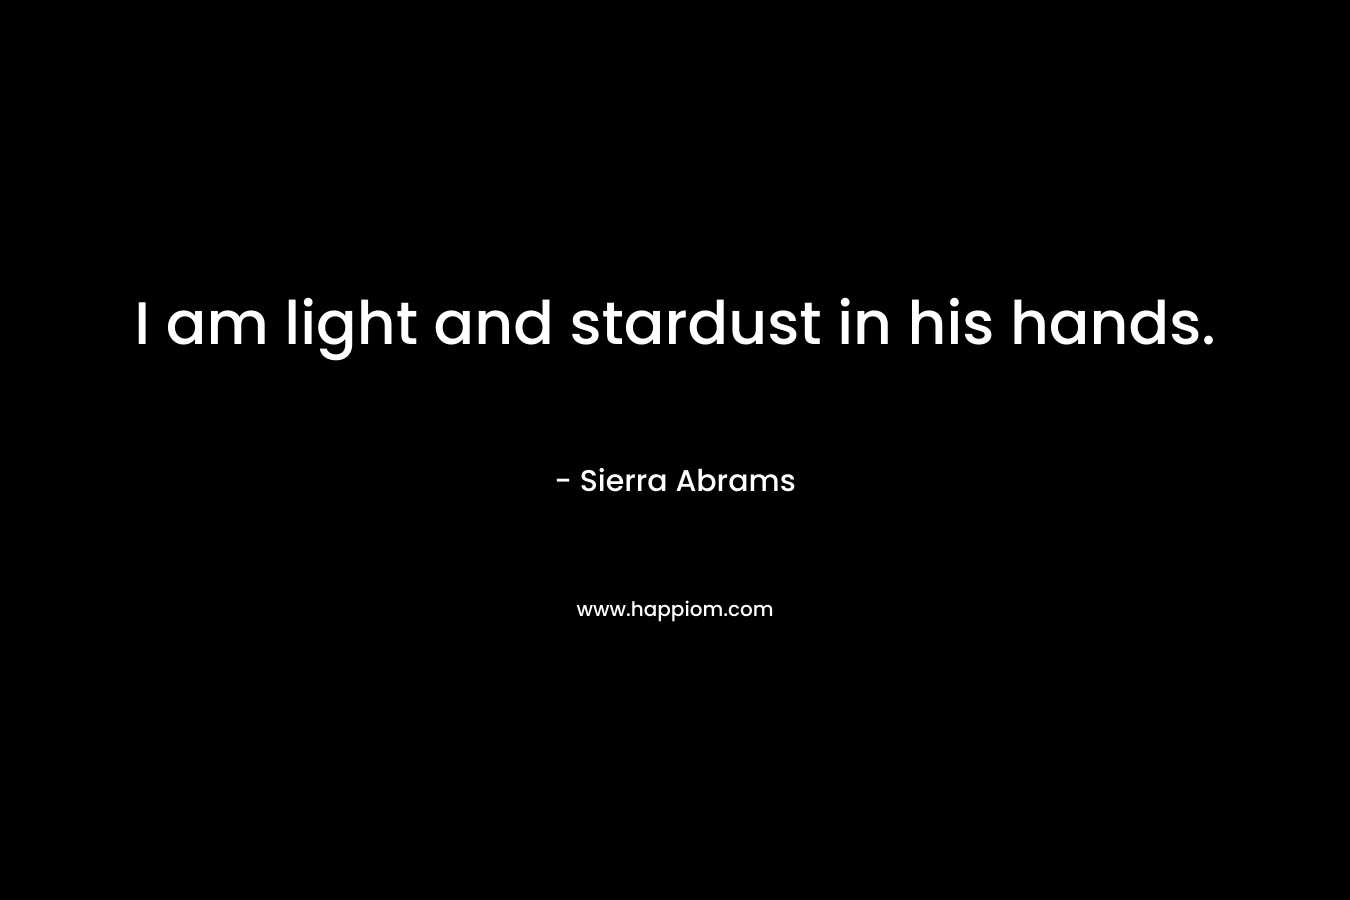 I am light and stardust in his hands.